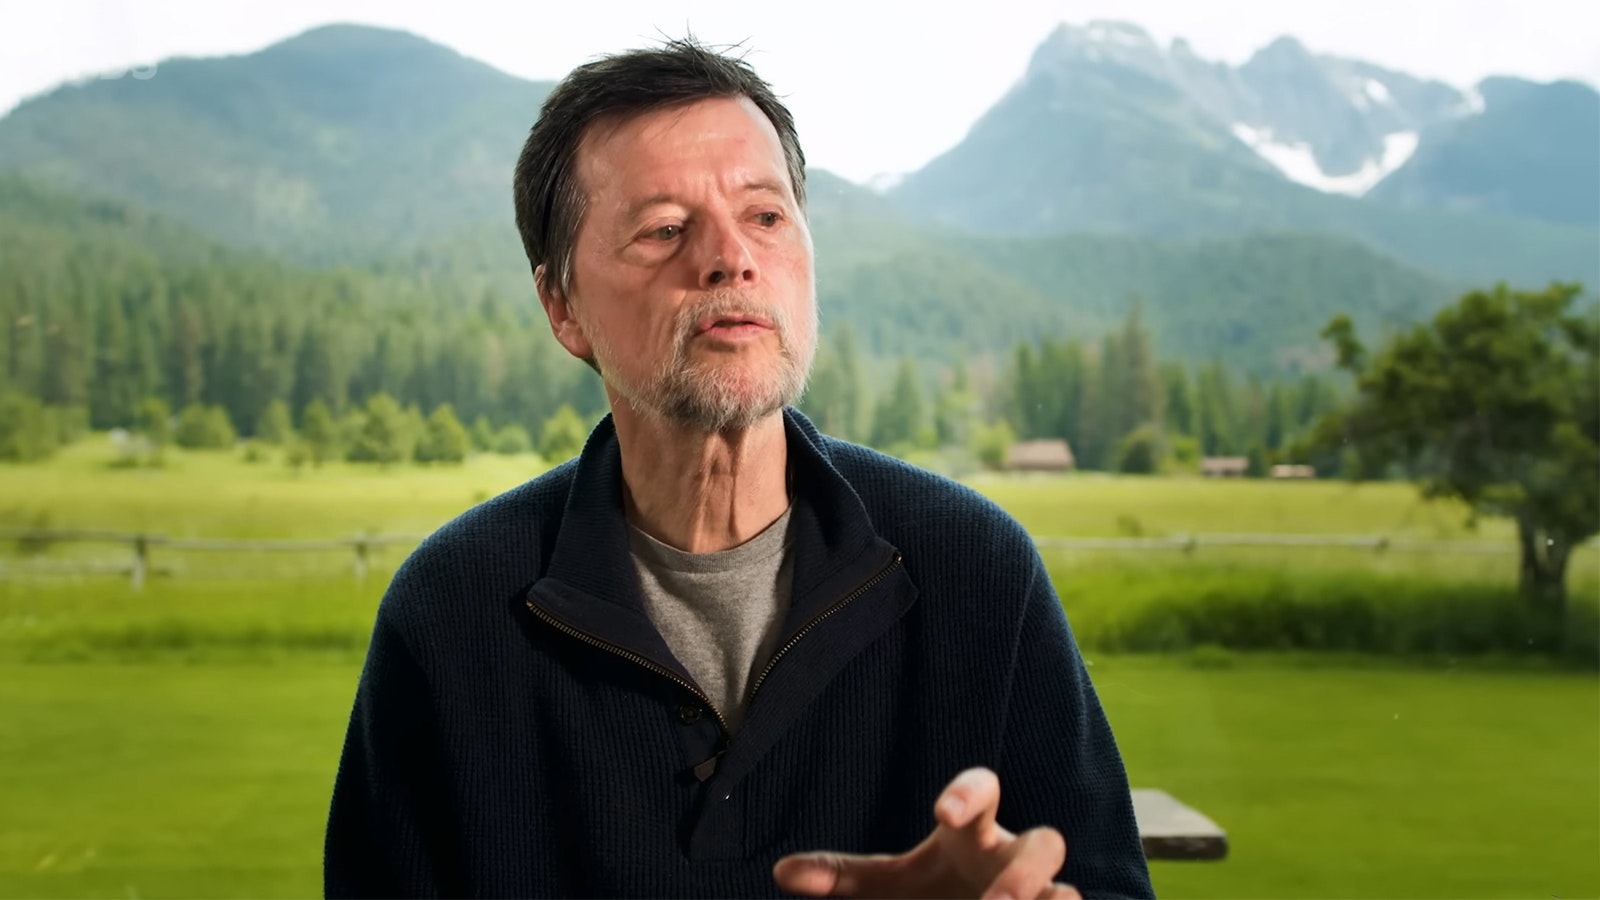 Ken Burns talks about his new documentary on the American bison.